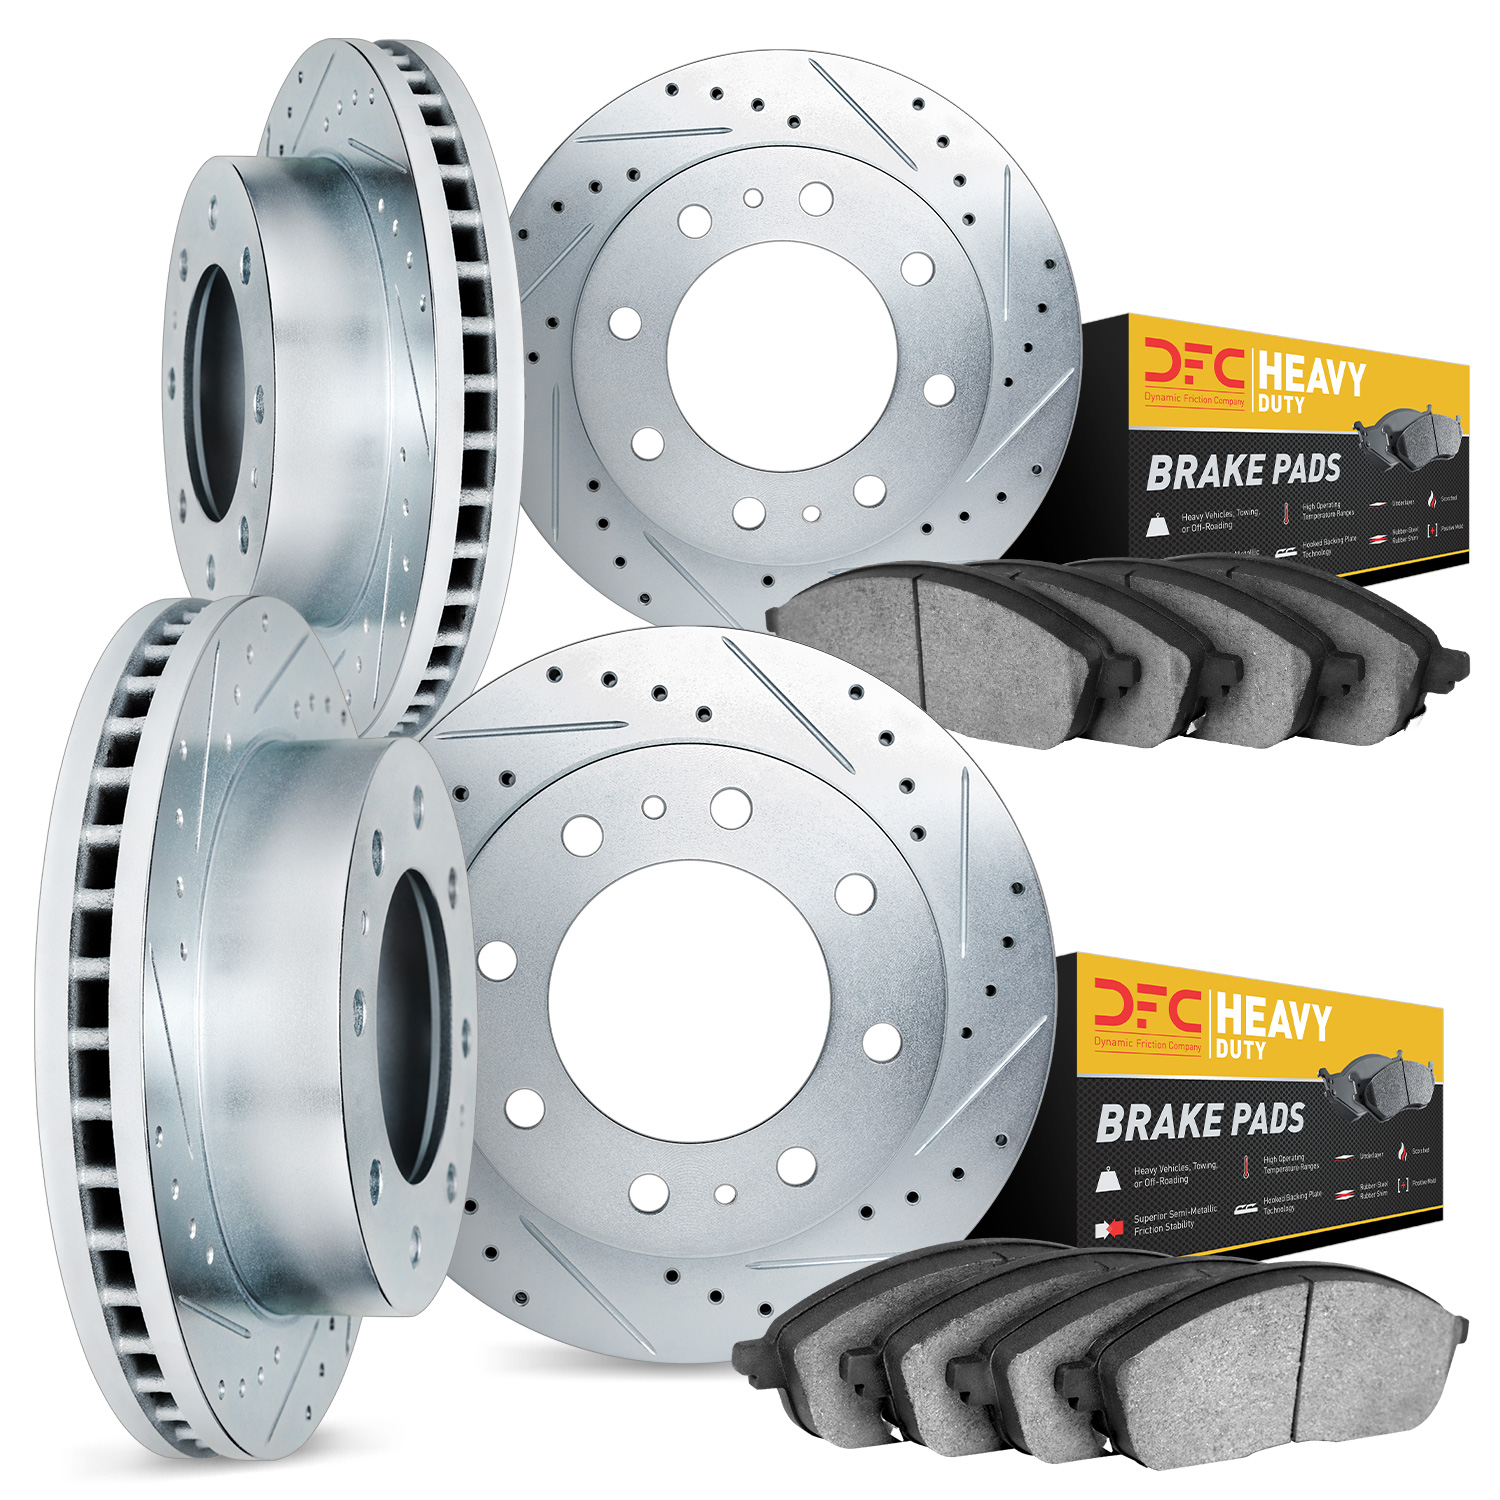 7204-99096 Drilled/Slotted Rotors w/Heavy-Duty Brake Pads Kit [Silver], 2010-2012 Ford/Lincoln/Mercury/Mazda, Position: Front an